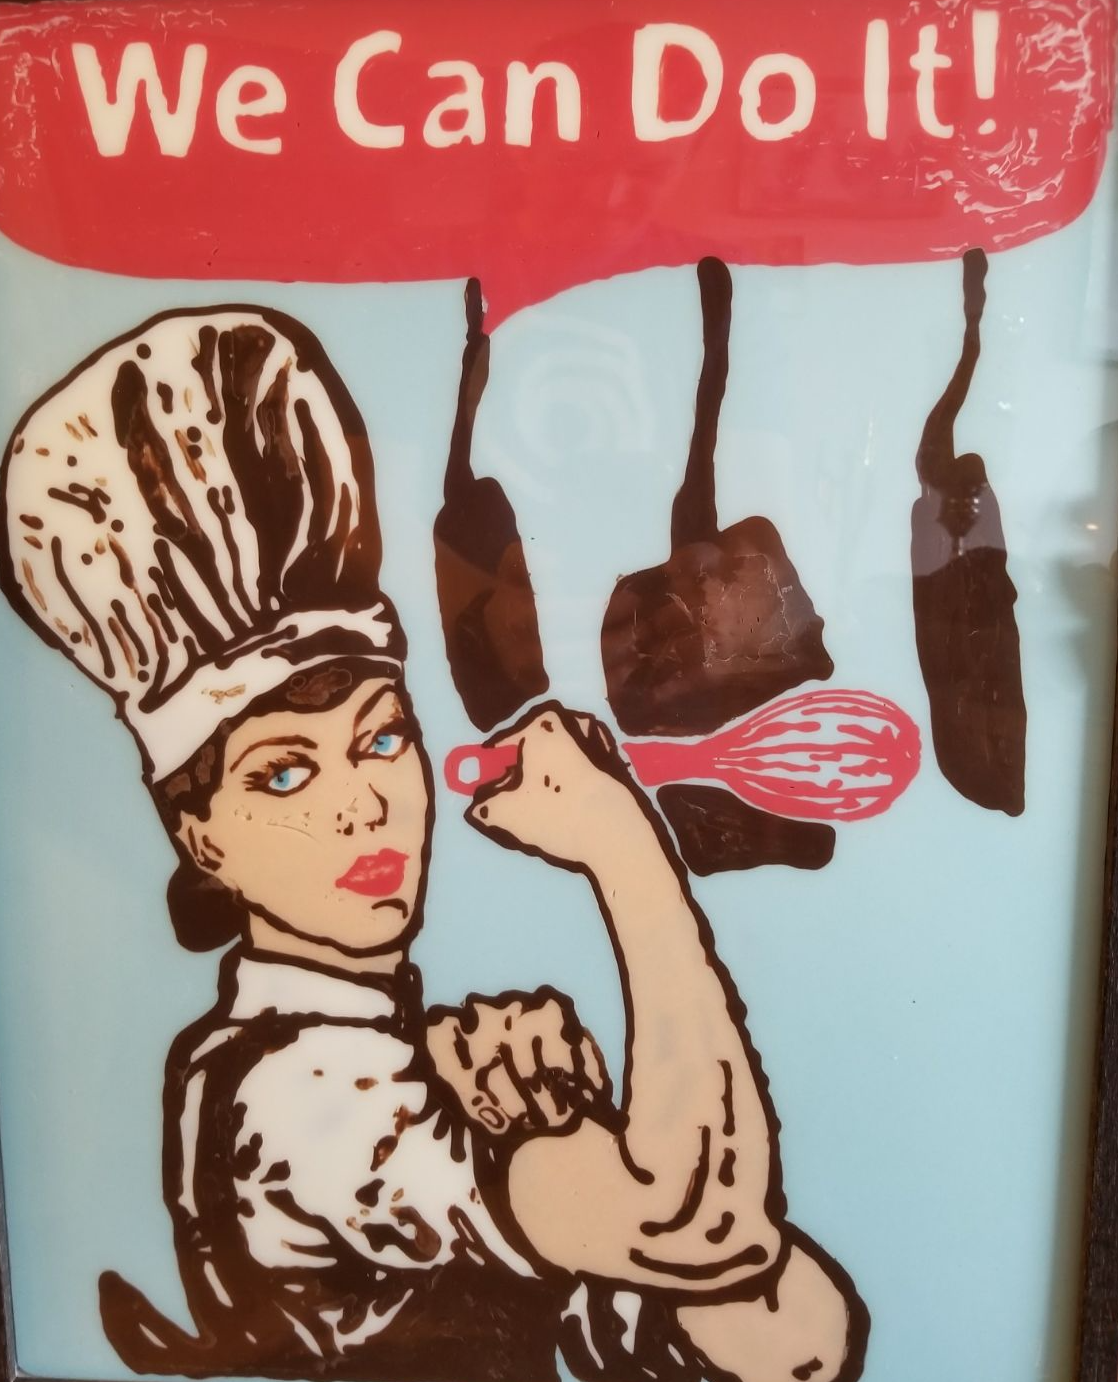 A poster that depicts a female chef in a position of homage to Rosie the Riveter. The poster is made out of coloured chocolate: red, white, brown and blue.